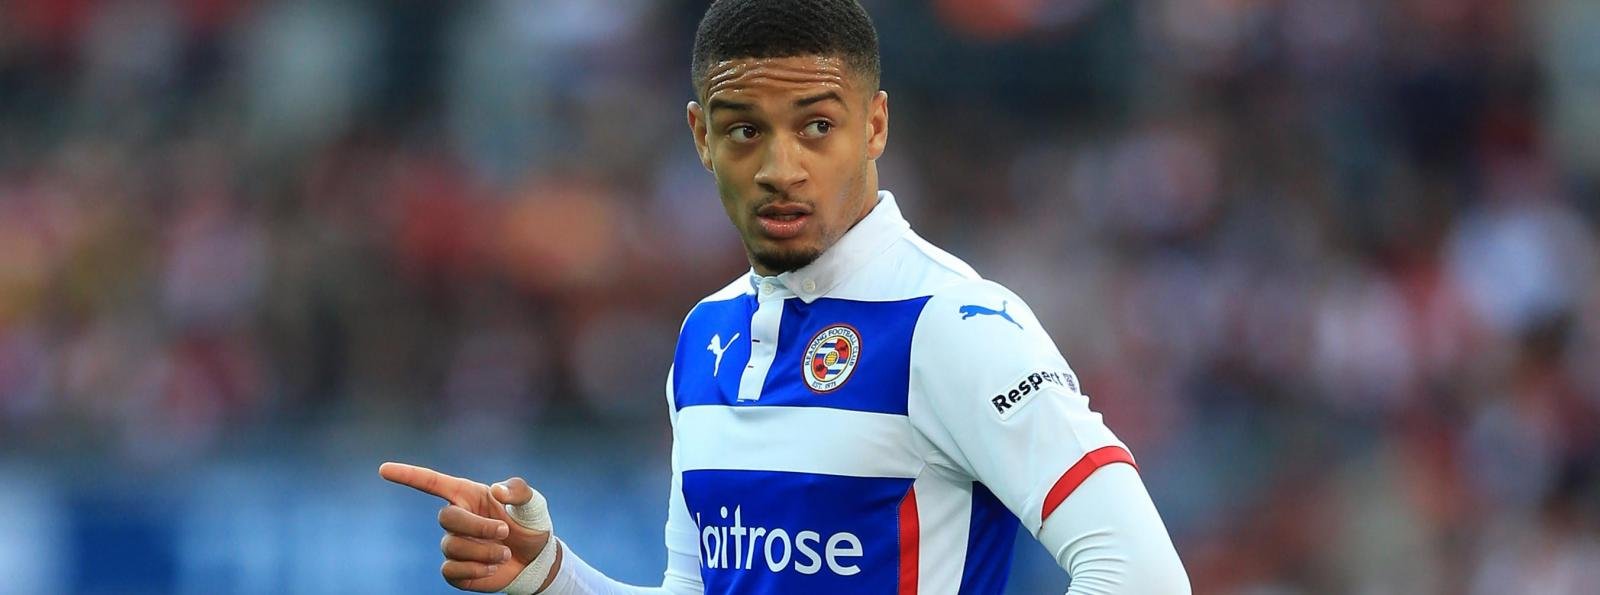 Profile: Chelsea defender and Reading FA Cup match-winner, Michael Hector